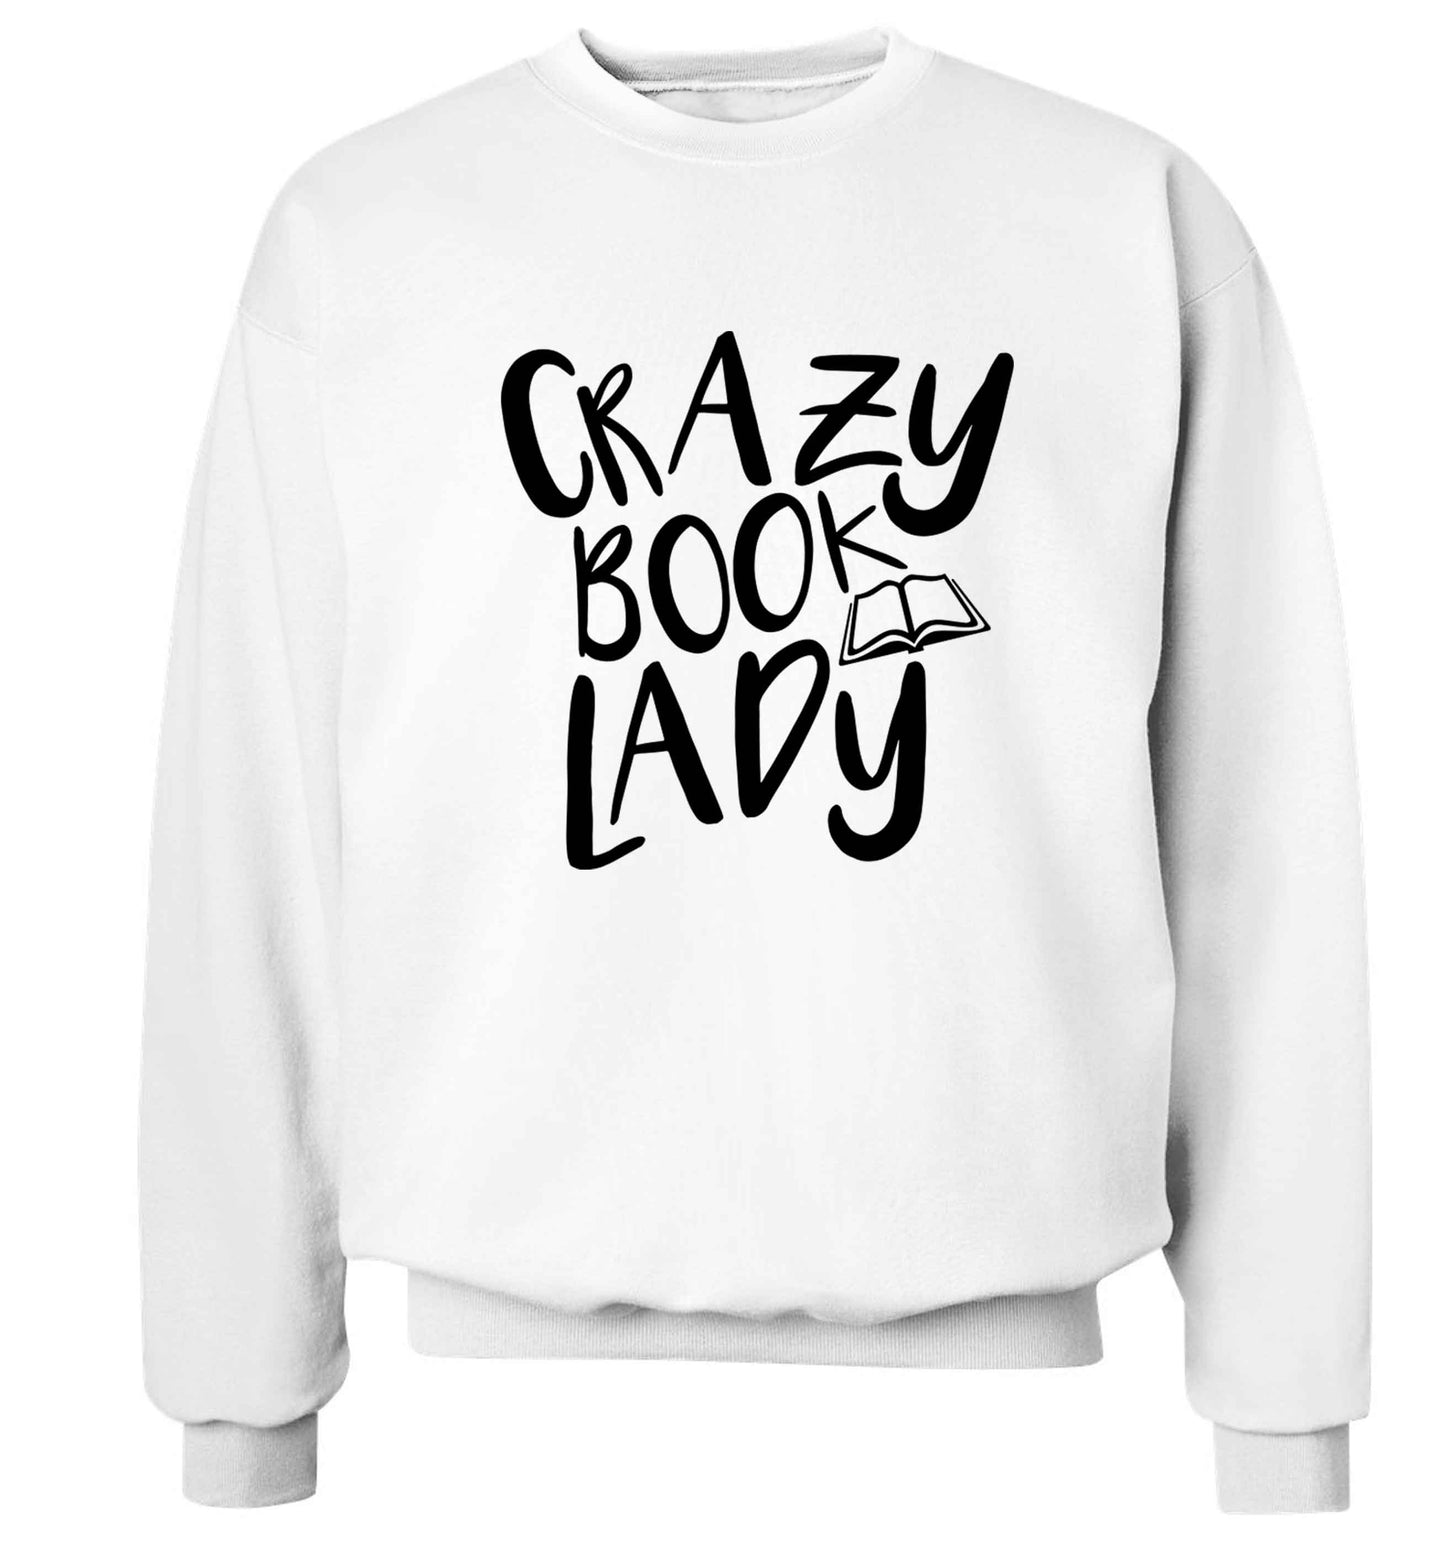 Crazy book lady Adult's unisex white Sweater 2XL